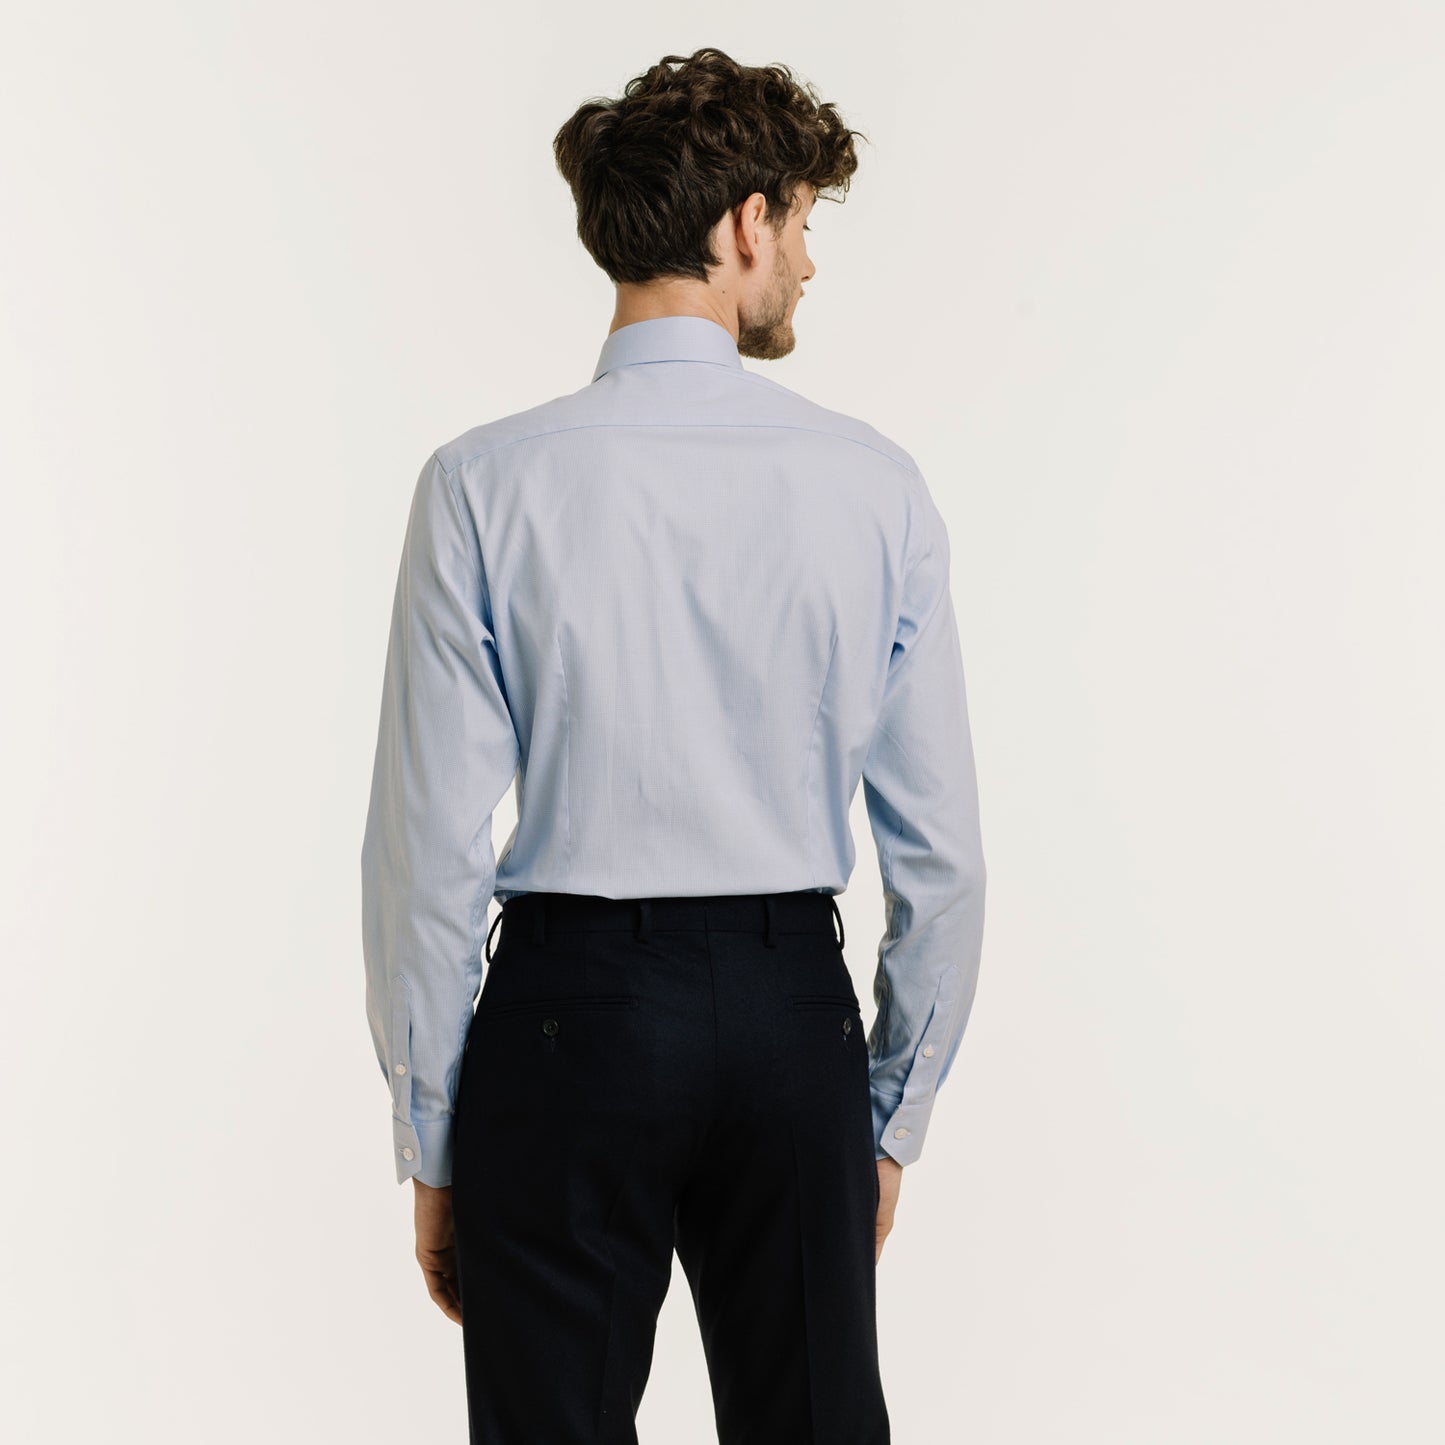 Fitted shirt in blue double-twisted oxford